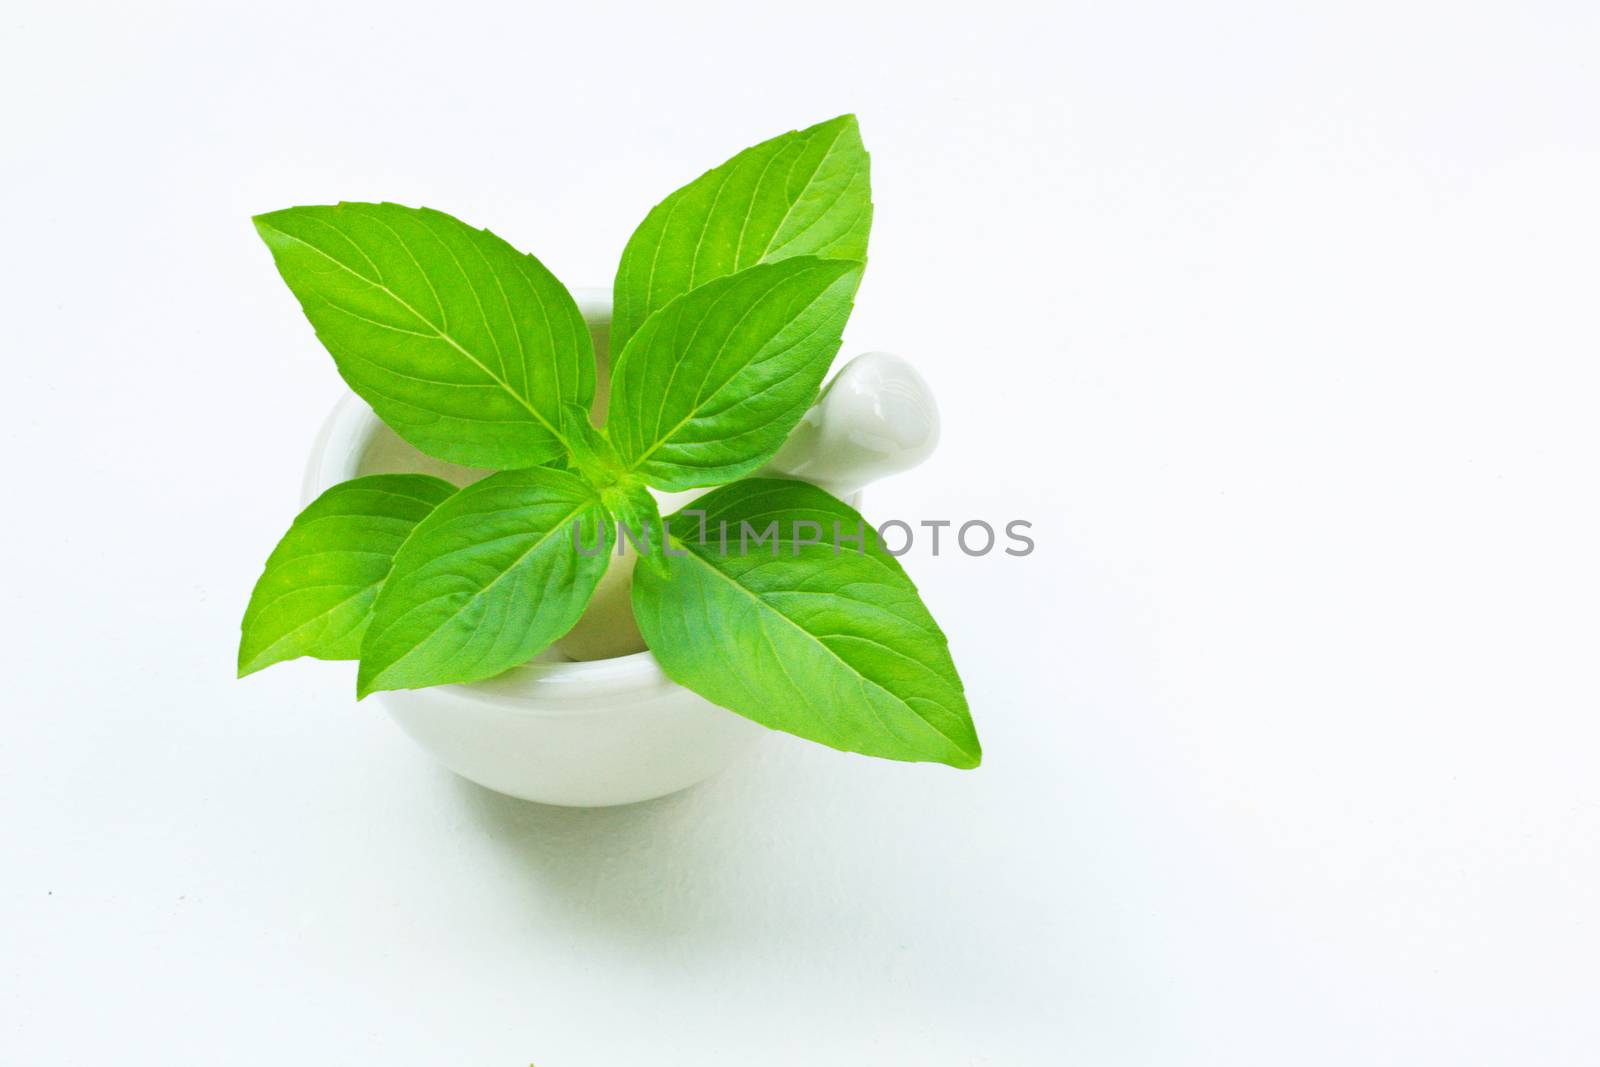 Basil in porcelain mortar and pestle  on white background.